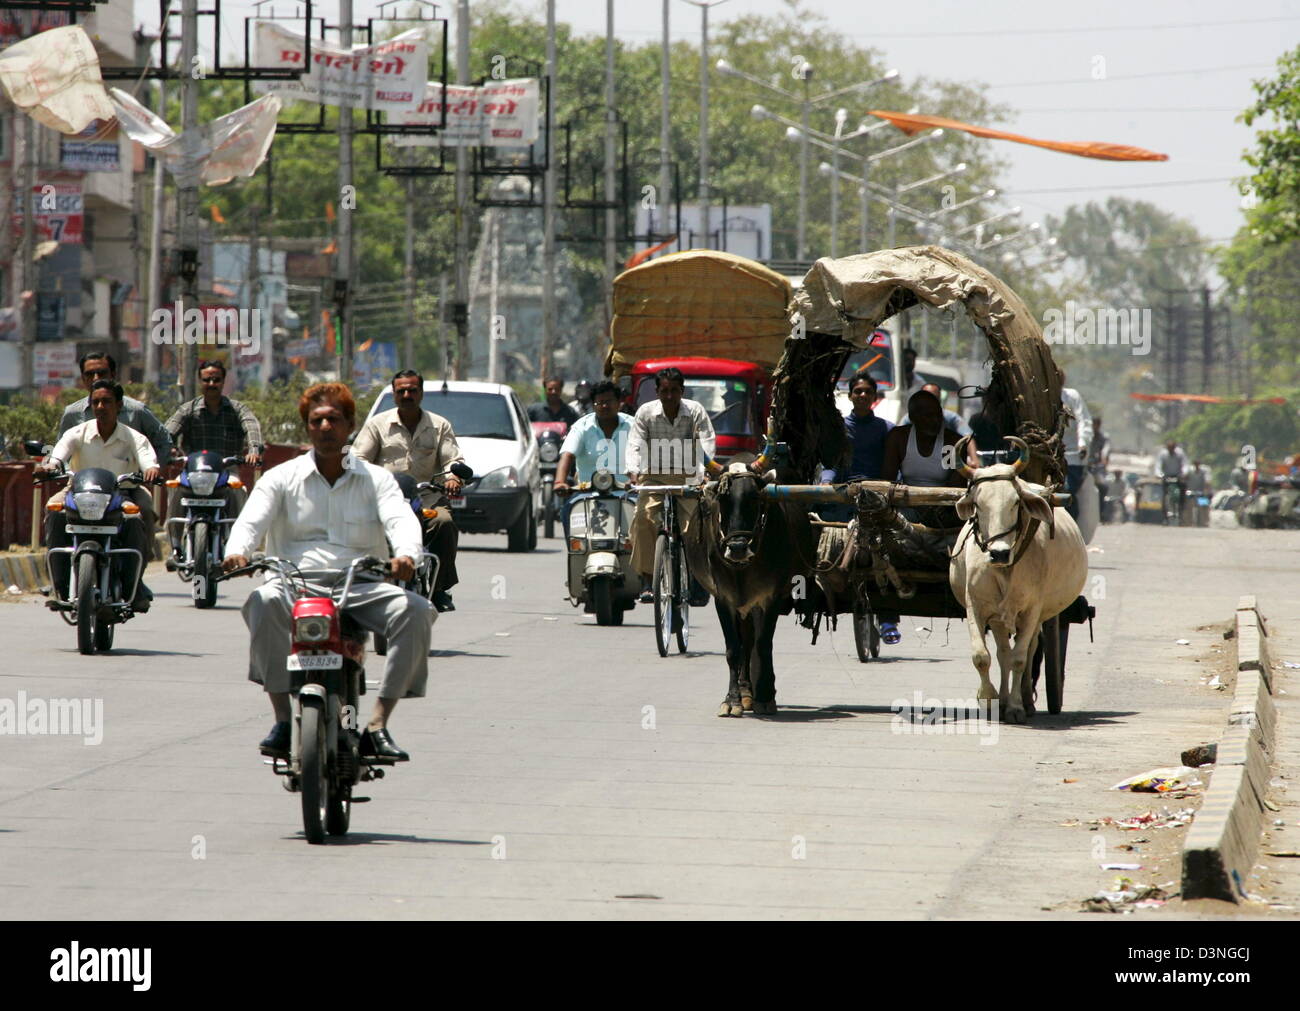 The photo shows an archaic seeming vehicle pulled by an ox between modern scooters and cars on a road in Indore, India, 28 April 2006. Indore lies in the federal state of Madhya Pradesh and counts 1.692.400 million inhabitants. It is an industrial city with cotton, metall, furniture and chemical industries, a cultural centre with a university, theatres, museums, cinemas and a scien Stock Photo